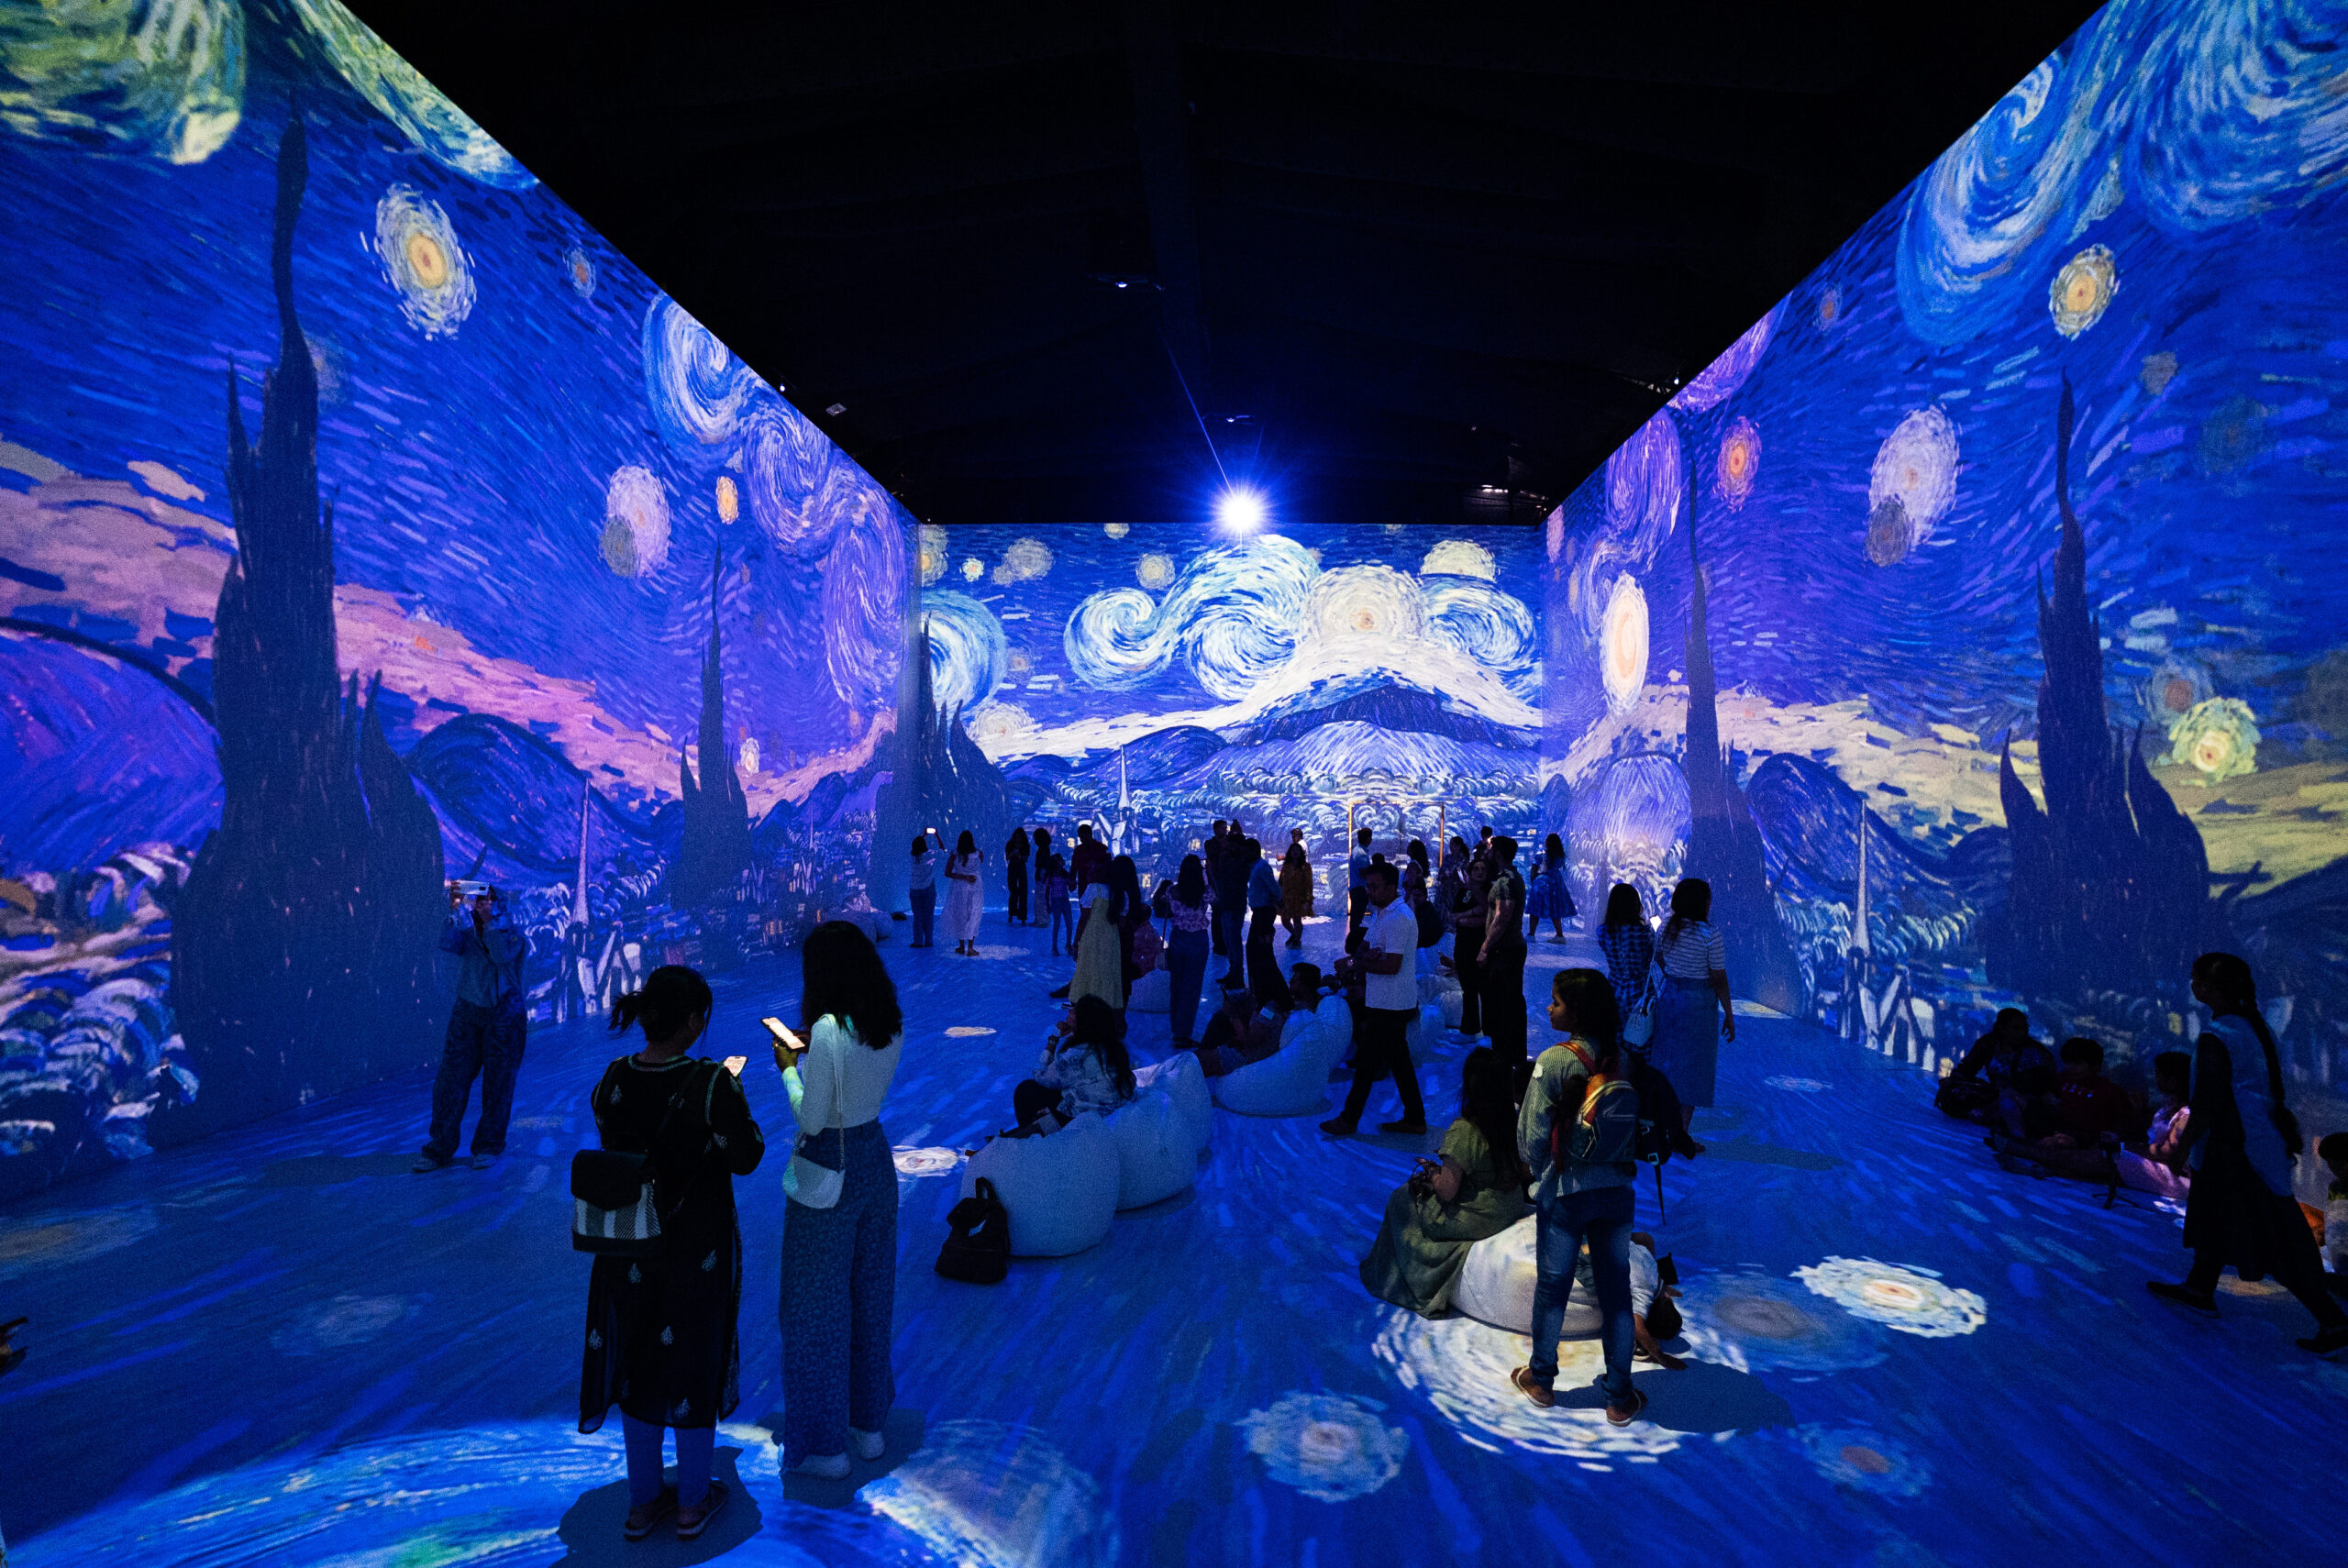 Hyderabad: The Real Van Gogh Immersive Experience extended till April 14